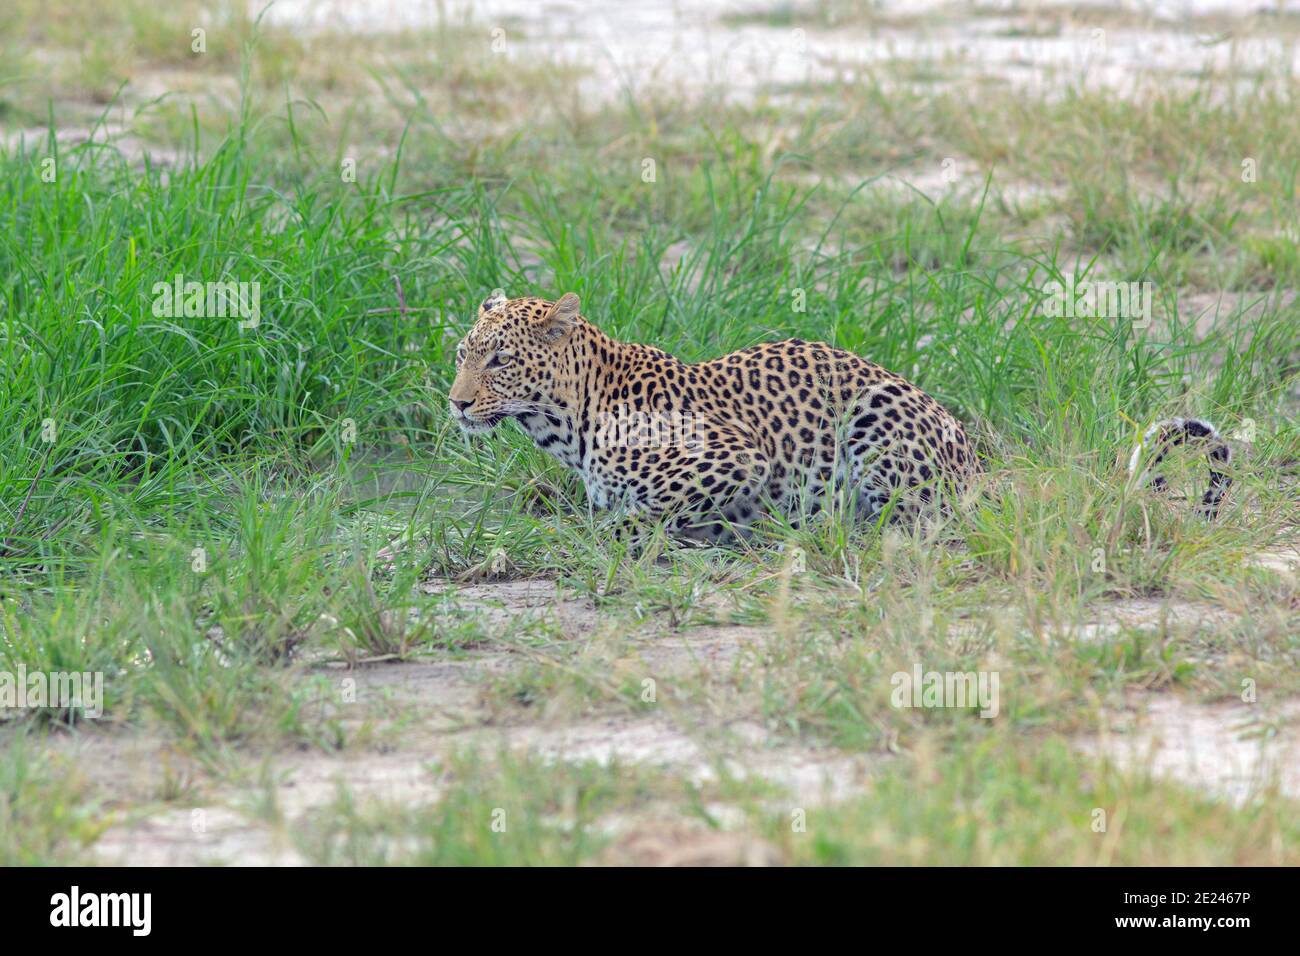 African Leopard (Panthera pardus). Crouching, sitting, about to leave after drinking. Spotted coat or pelage, seen against grass end of wet season. Stock Photo